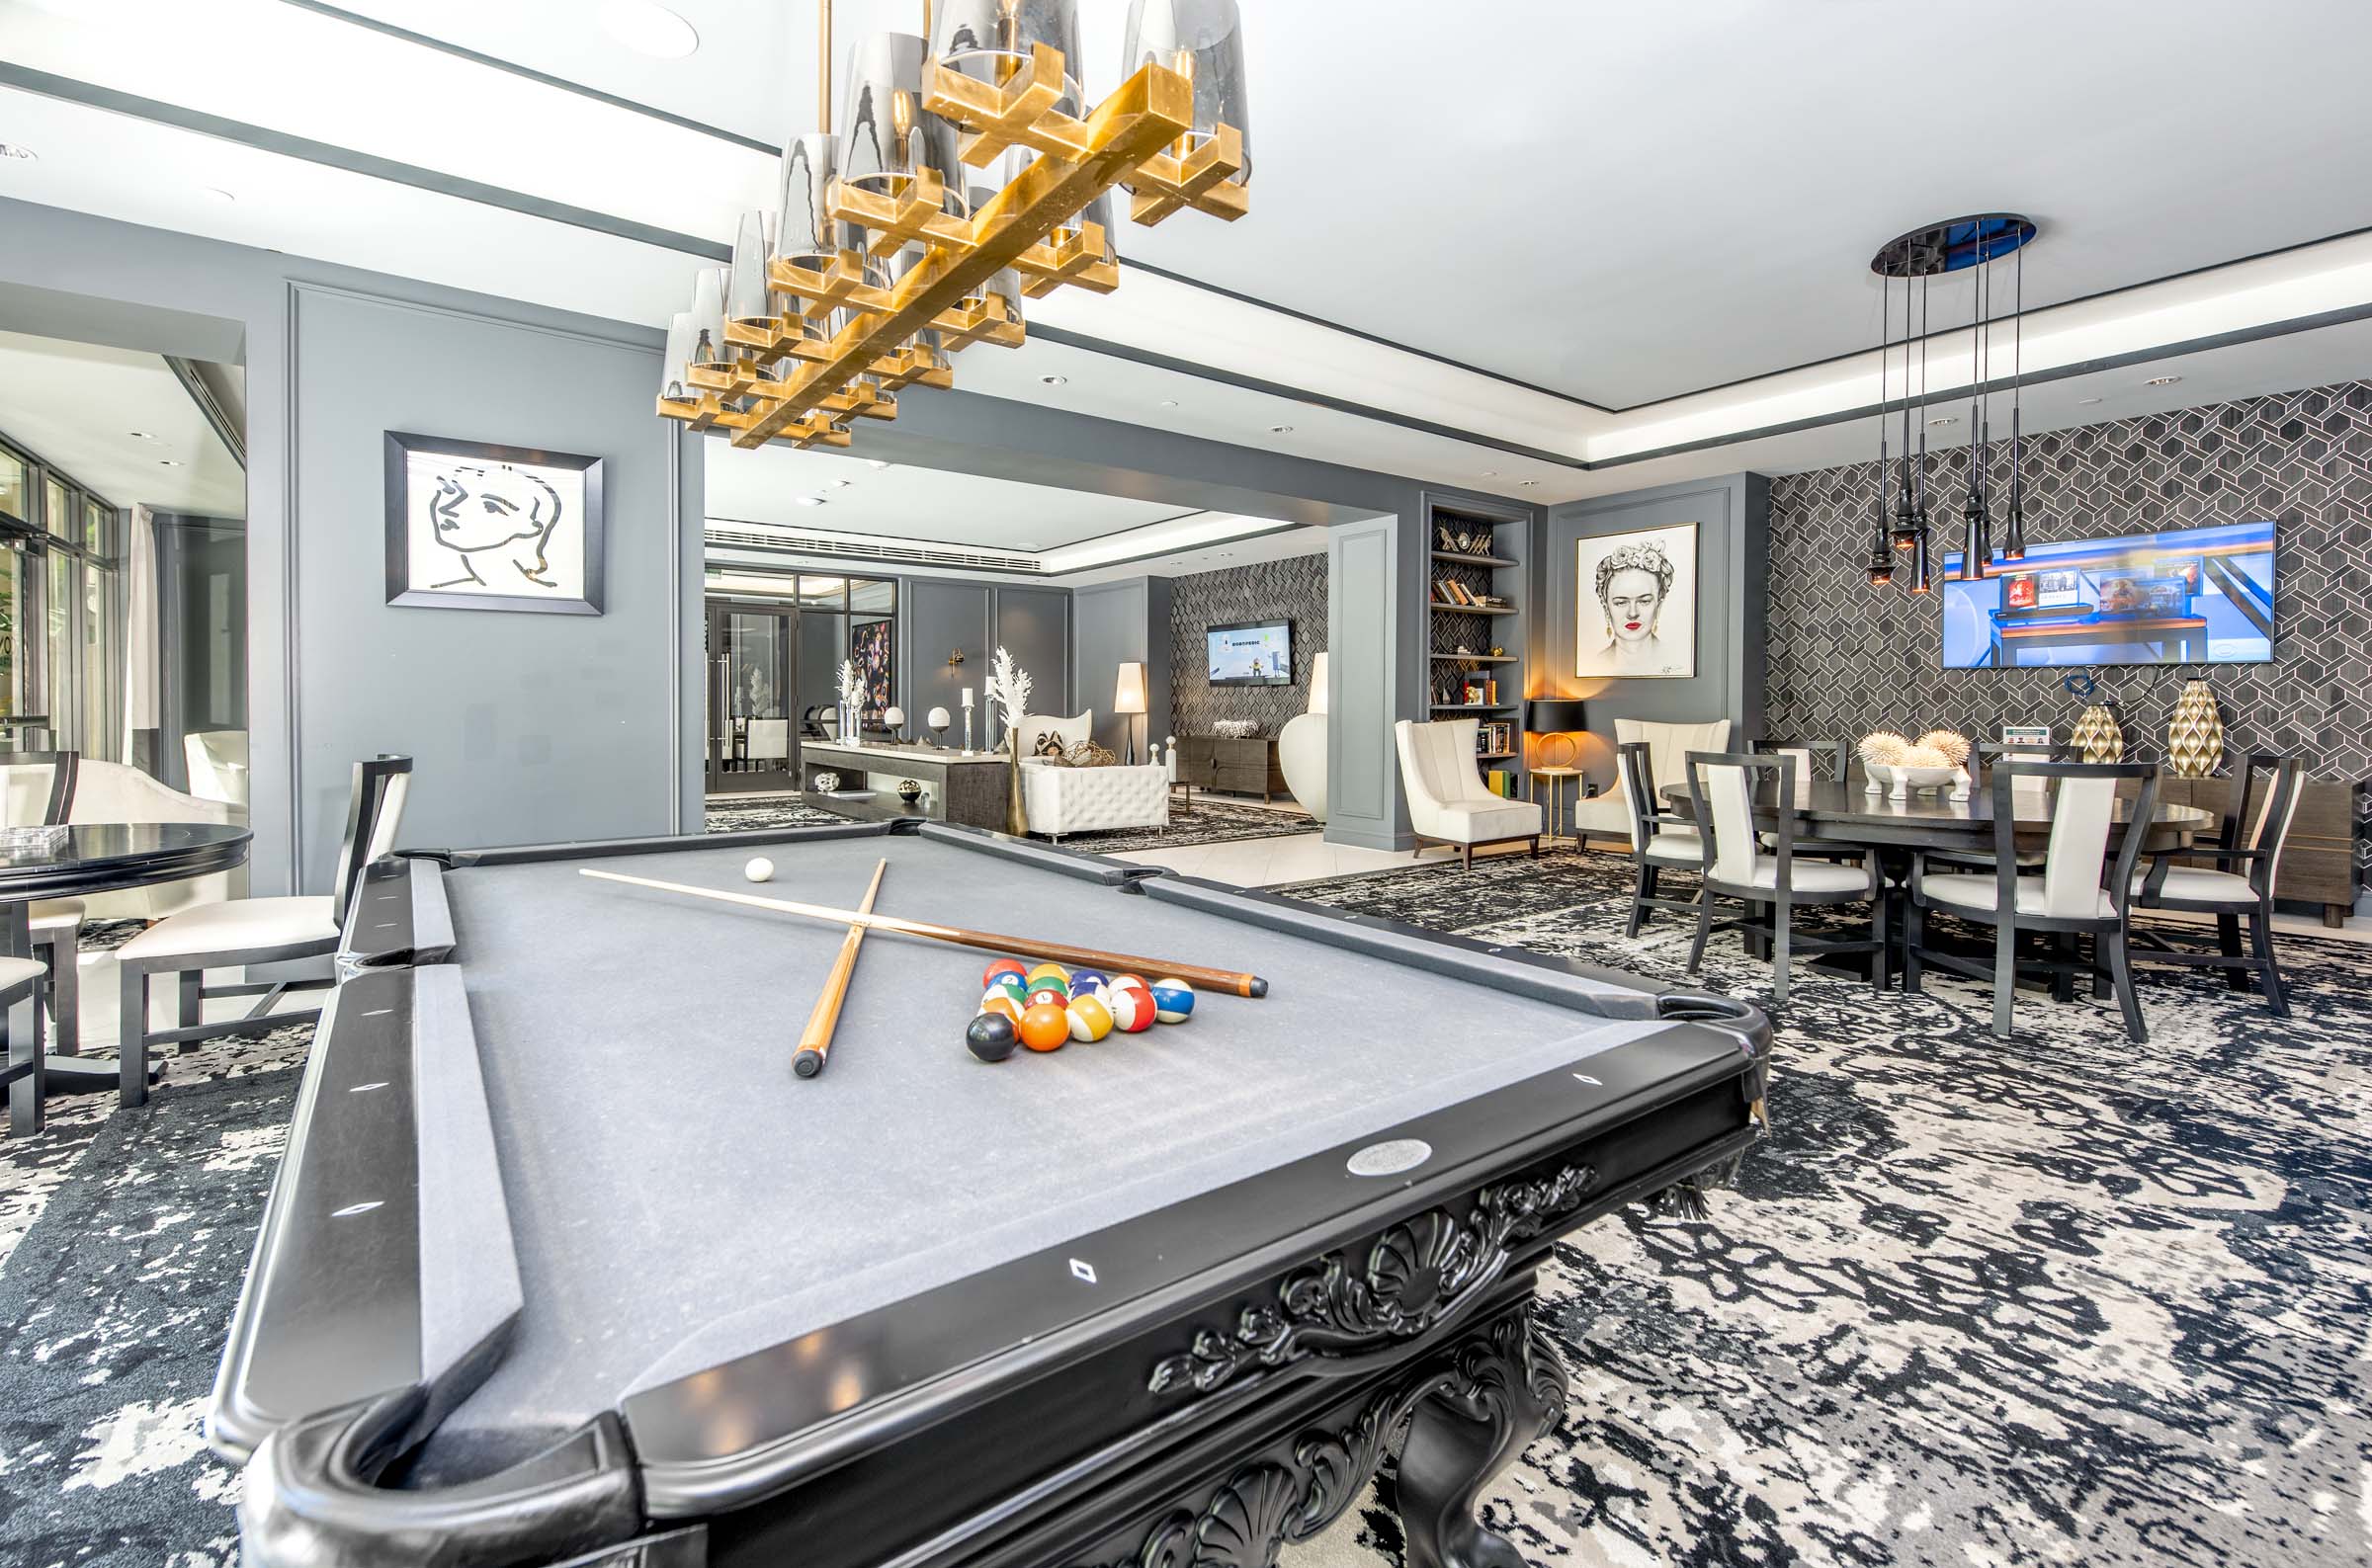 Join a game of pool at the billiards table in our Resident Lounge at Camden Central Apartments in St. Petersburg, FL.